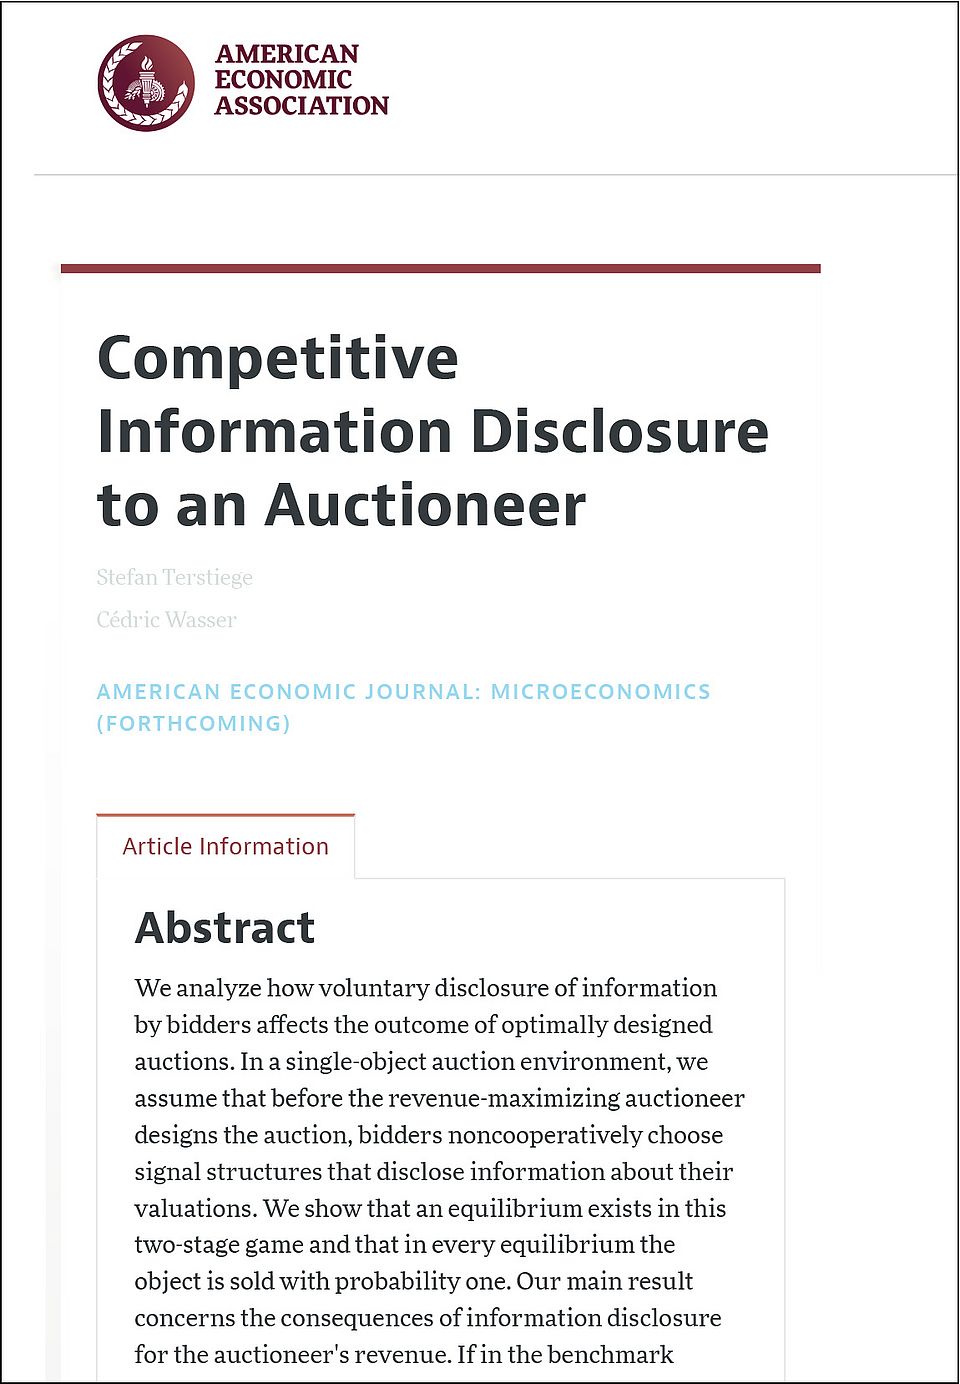 Competitive Information Disclosure to an Auctioneer